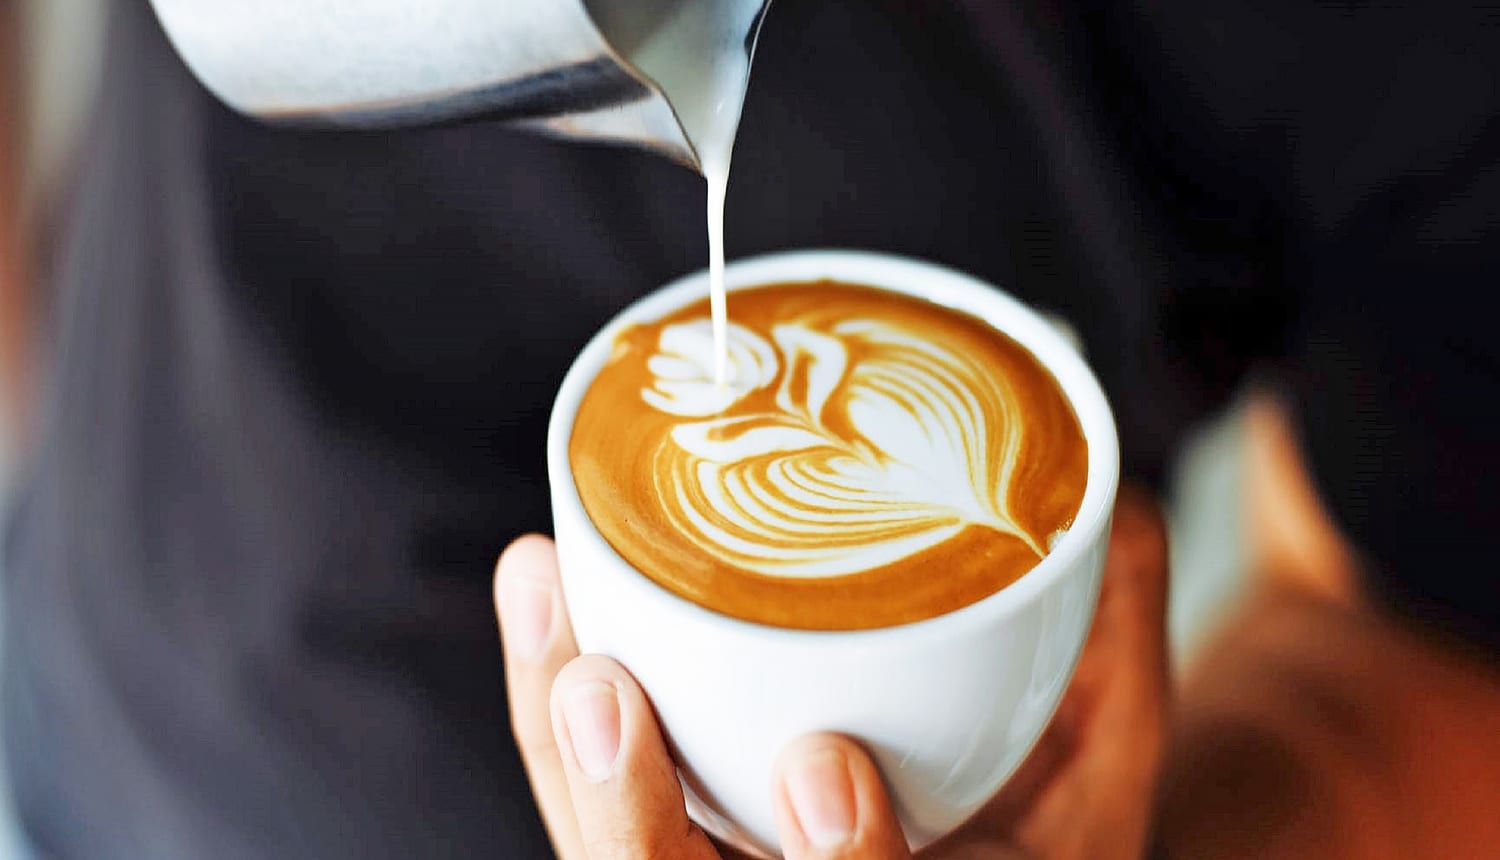 https://media-cldnry.s-nbcnews.com/image/upload/rockcms/2023-04/how-to-perfect-latte-at-home-main-zz-230424-637d68.jpg